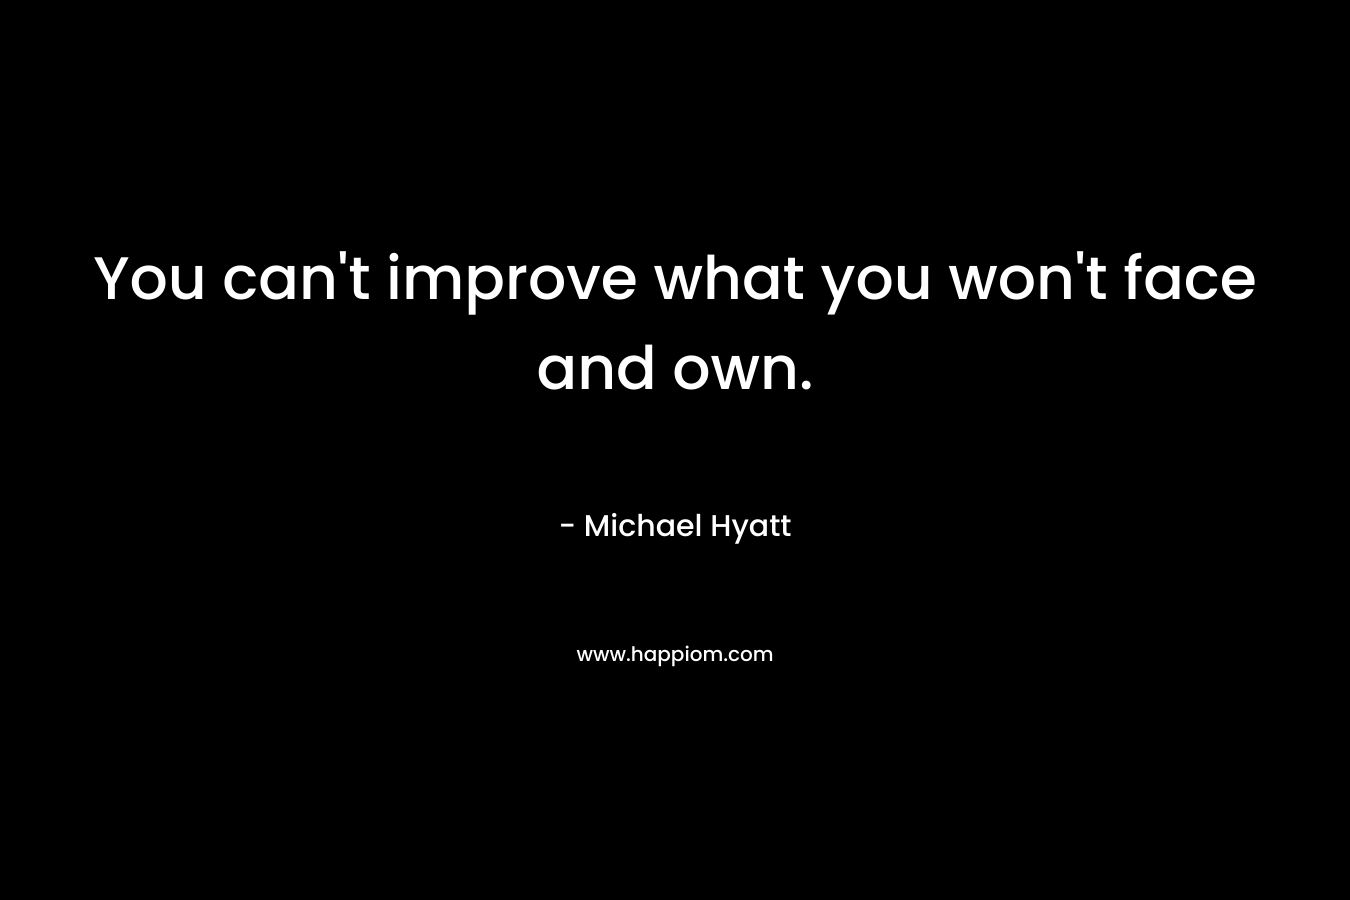 You can't improve what you won't face and own.